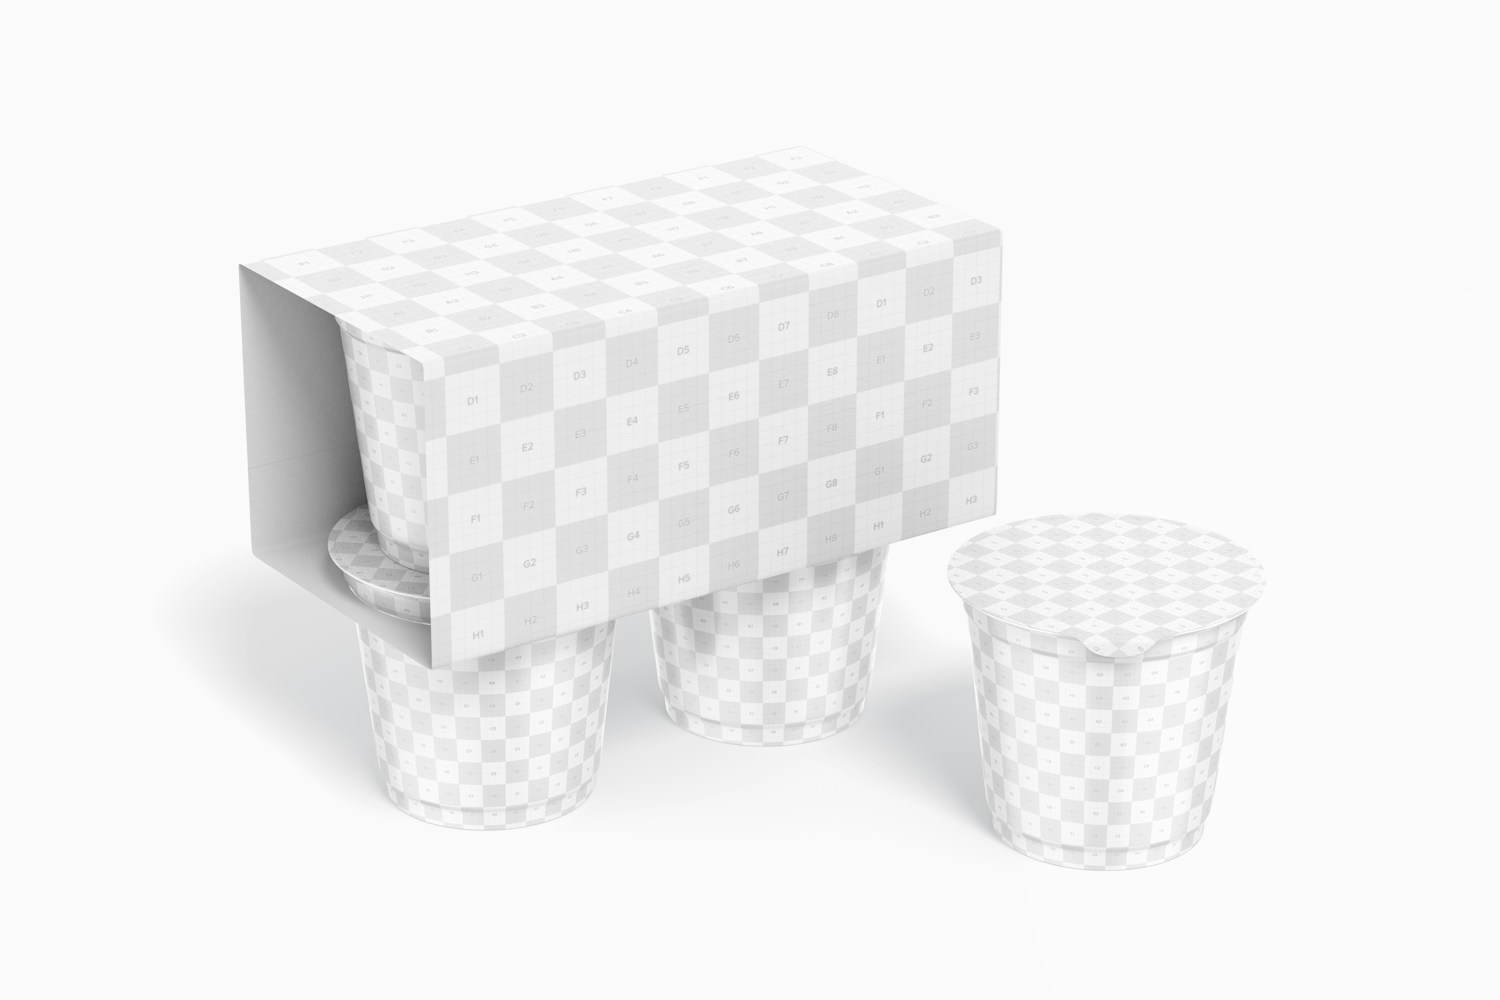 4 Oz Jelly Cups Pack Mockup